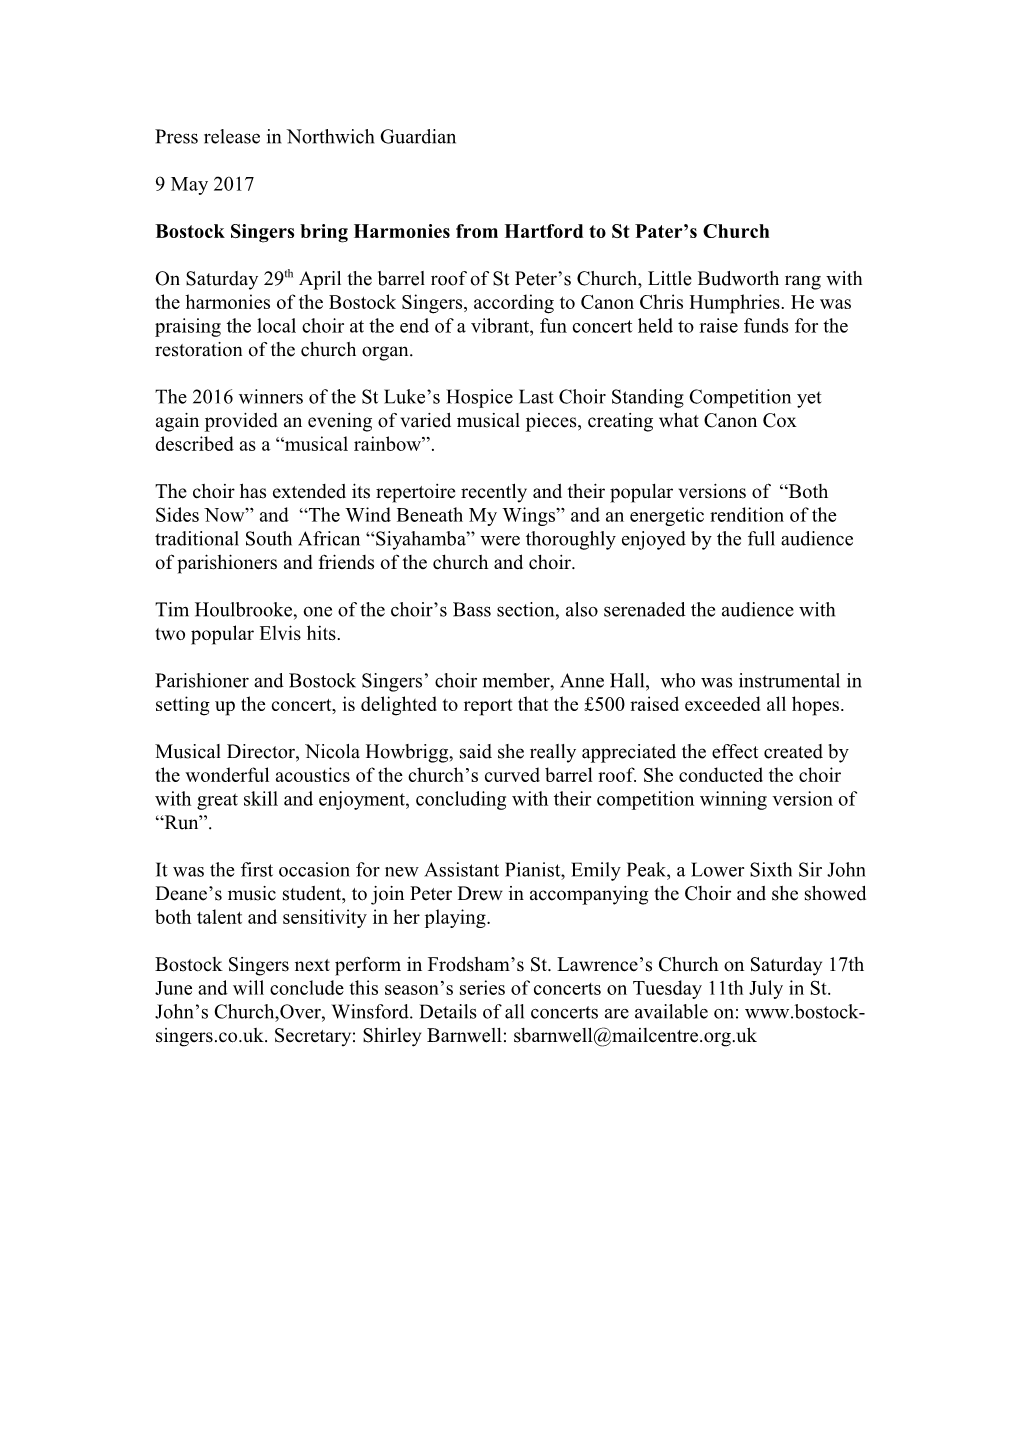 Press Release from Bostock Singers for Northwich and Winsford Guardian